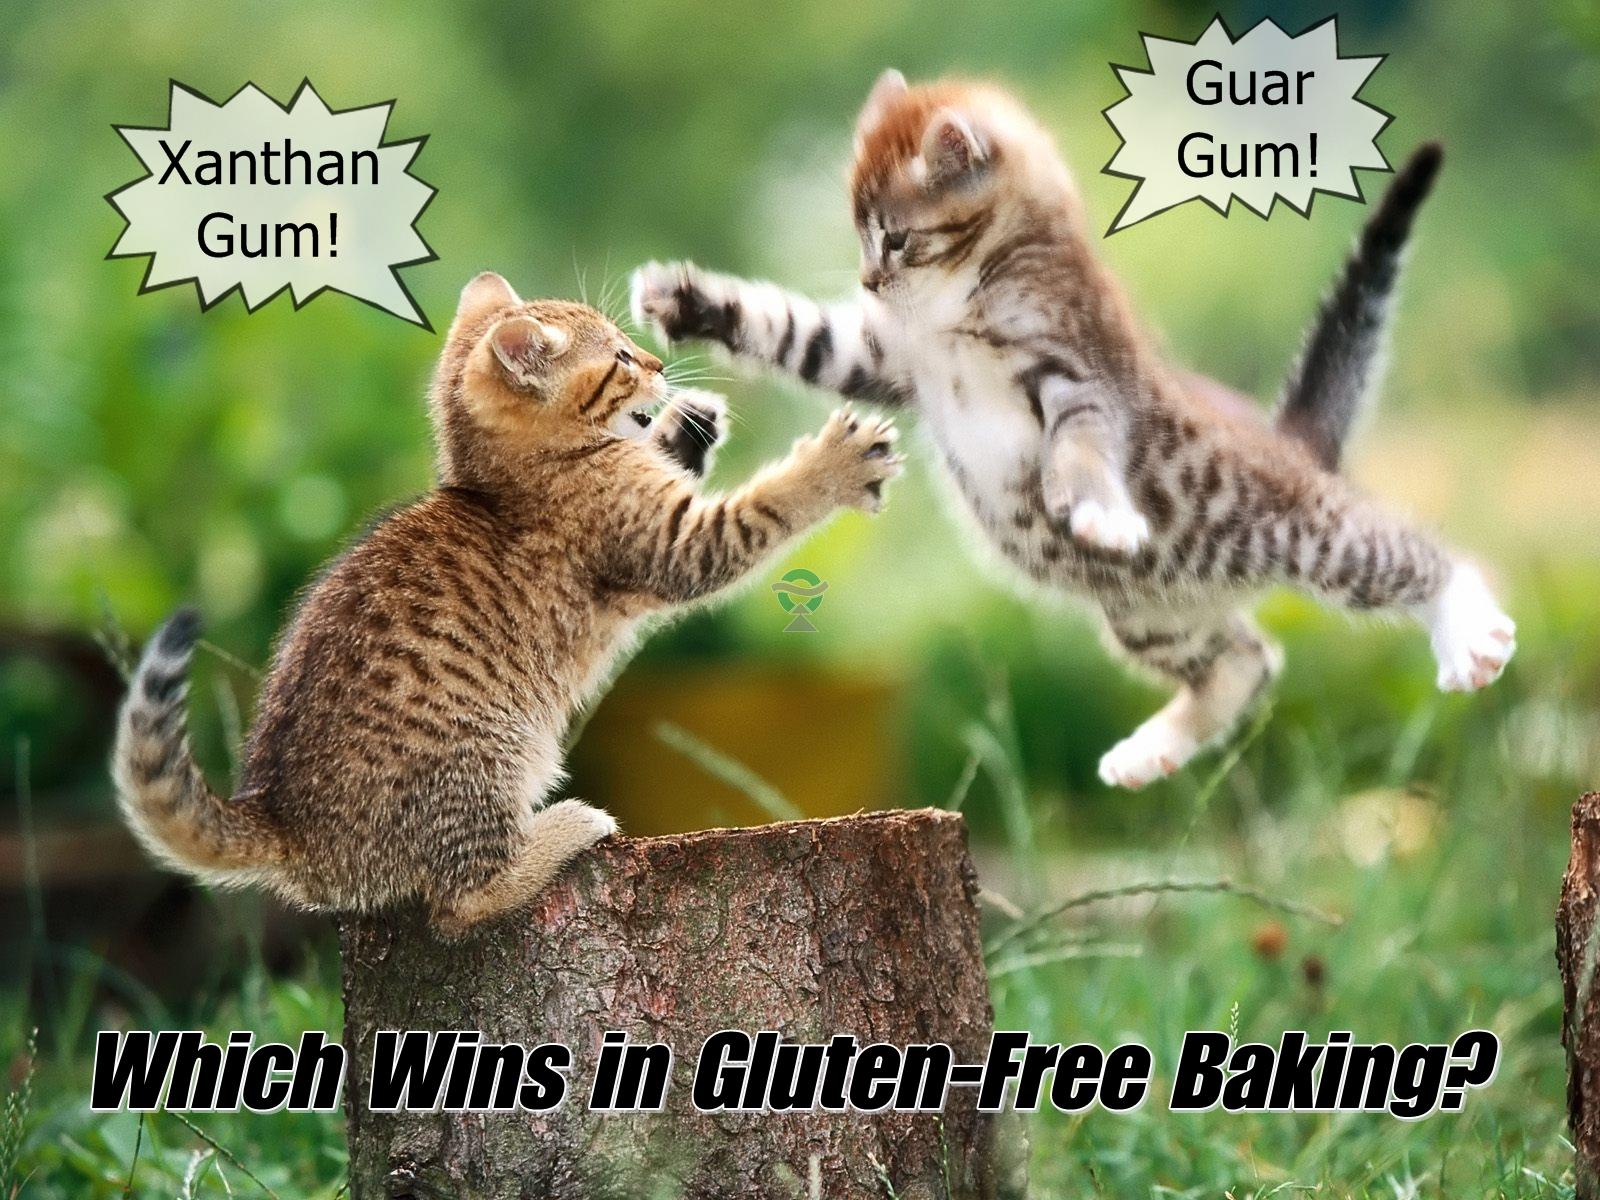  Which One You choose?Guar Gum or Xanthan Gum